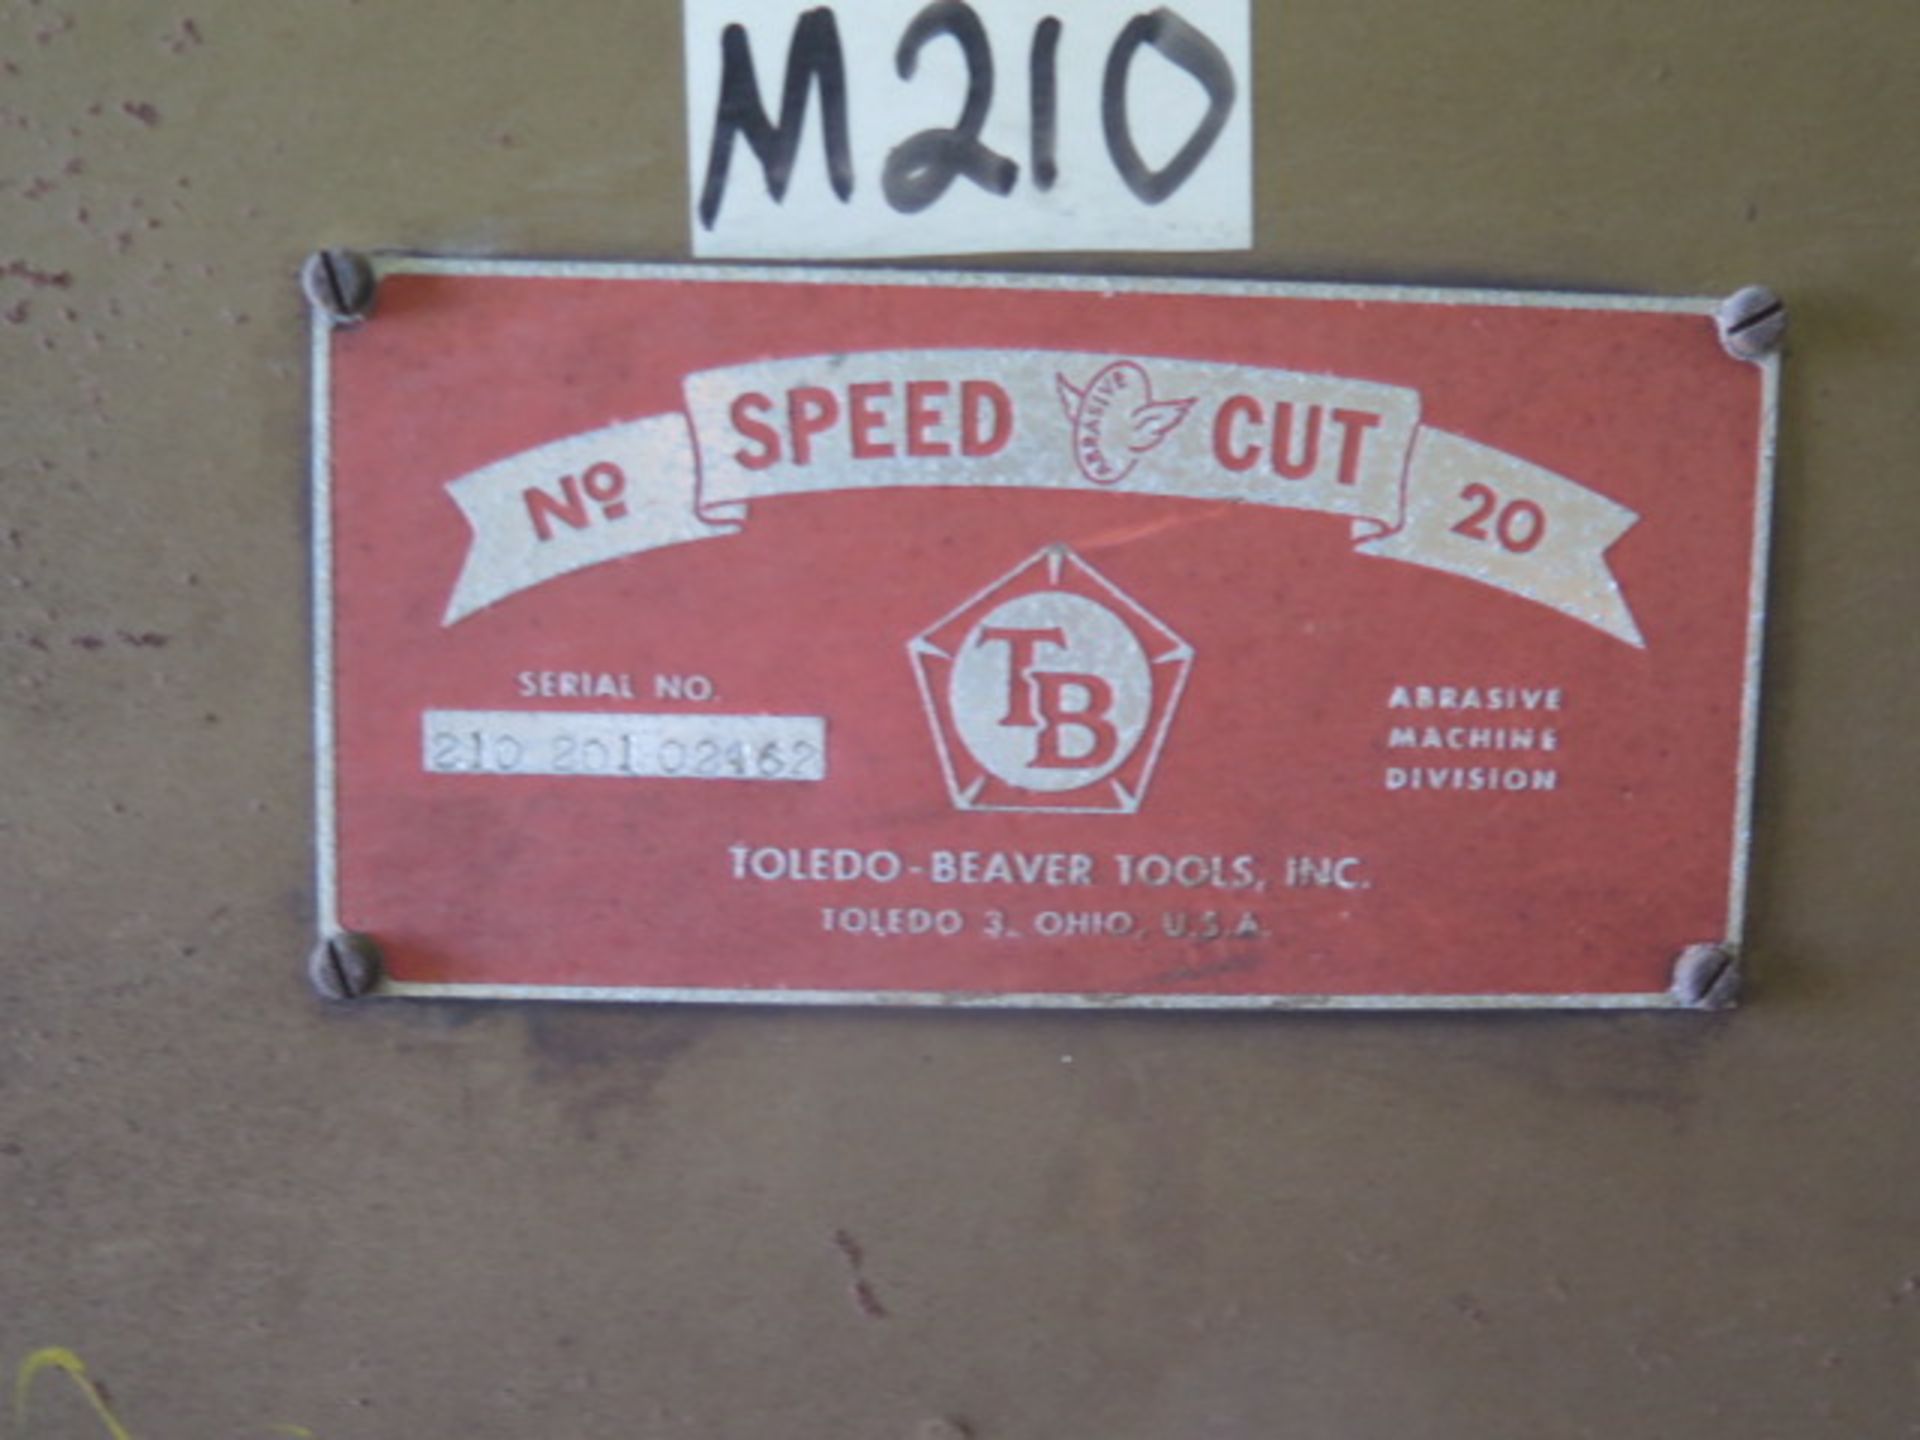 Toledo-Beaver No. 20 "Speed Cut" 20" Abrasive Cutoff Saw (SOLD AS-IS - NO WARRANTY) - Image 5 of 5